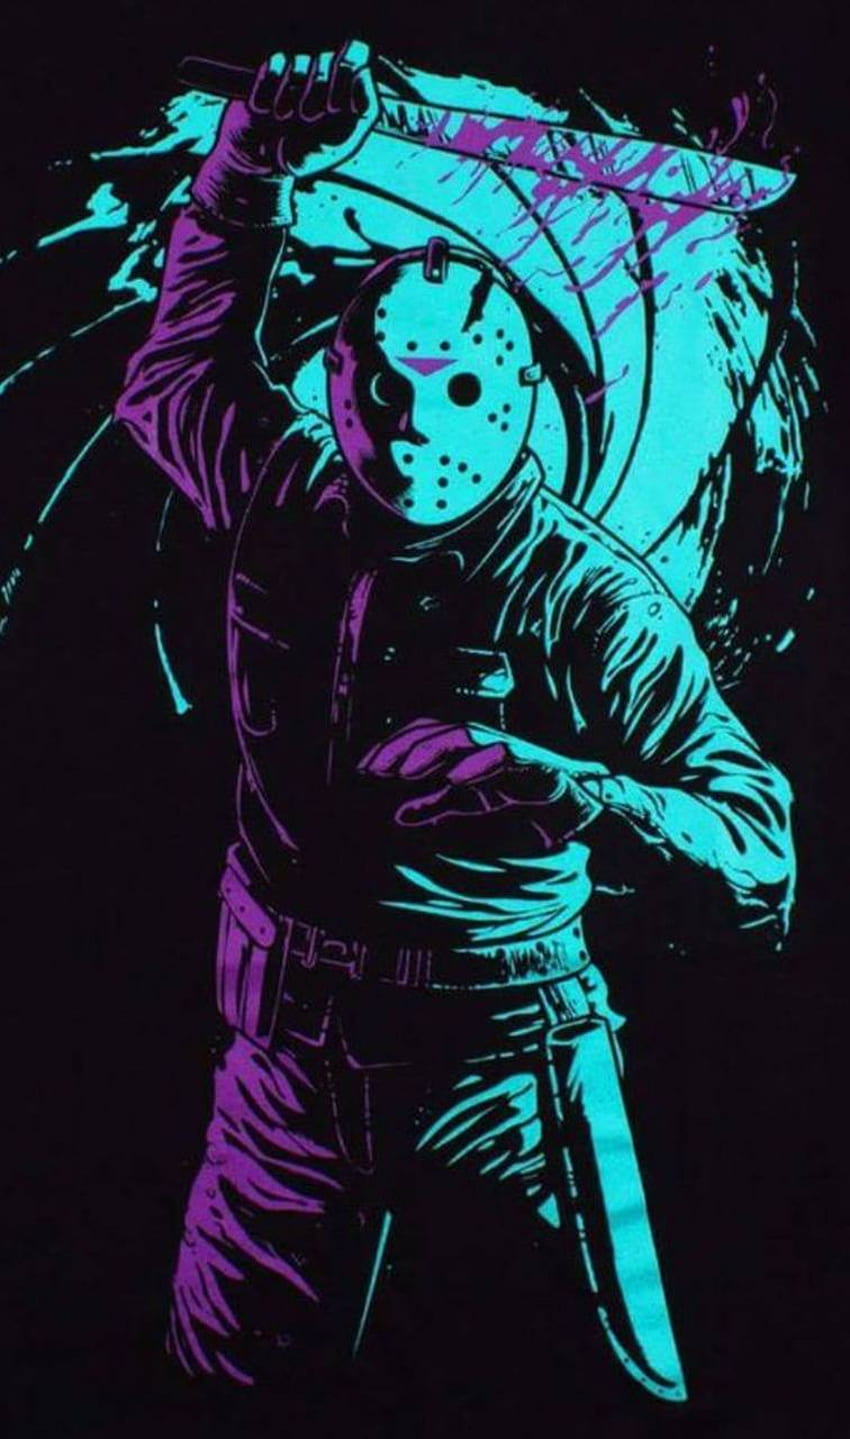 Wallpaper mask, Friday the 13th, horror, Jason for mobile and desktop,  section фильмы, resolution 2560x1600 - download